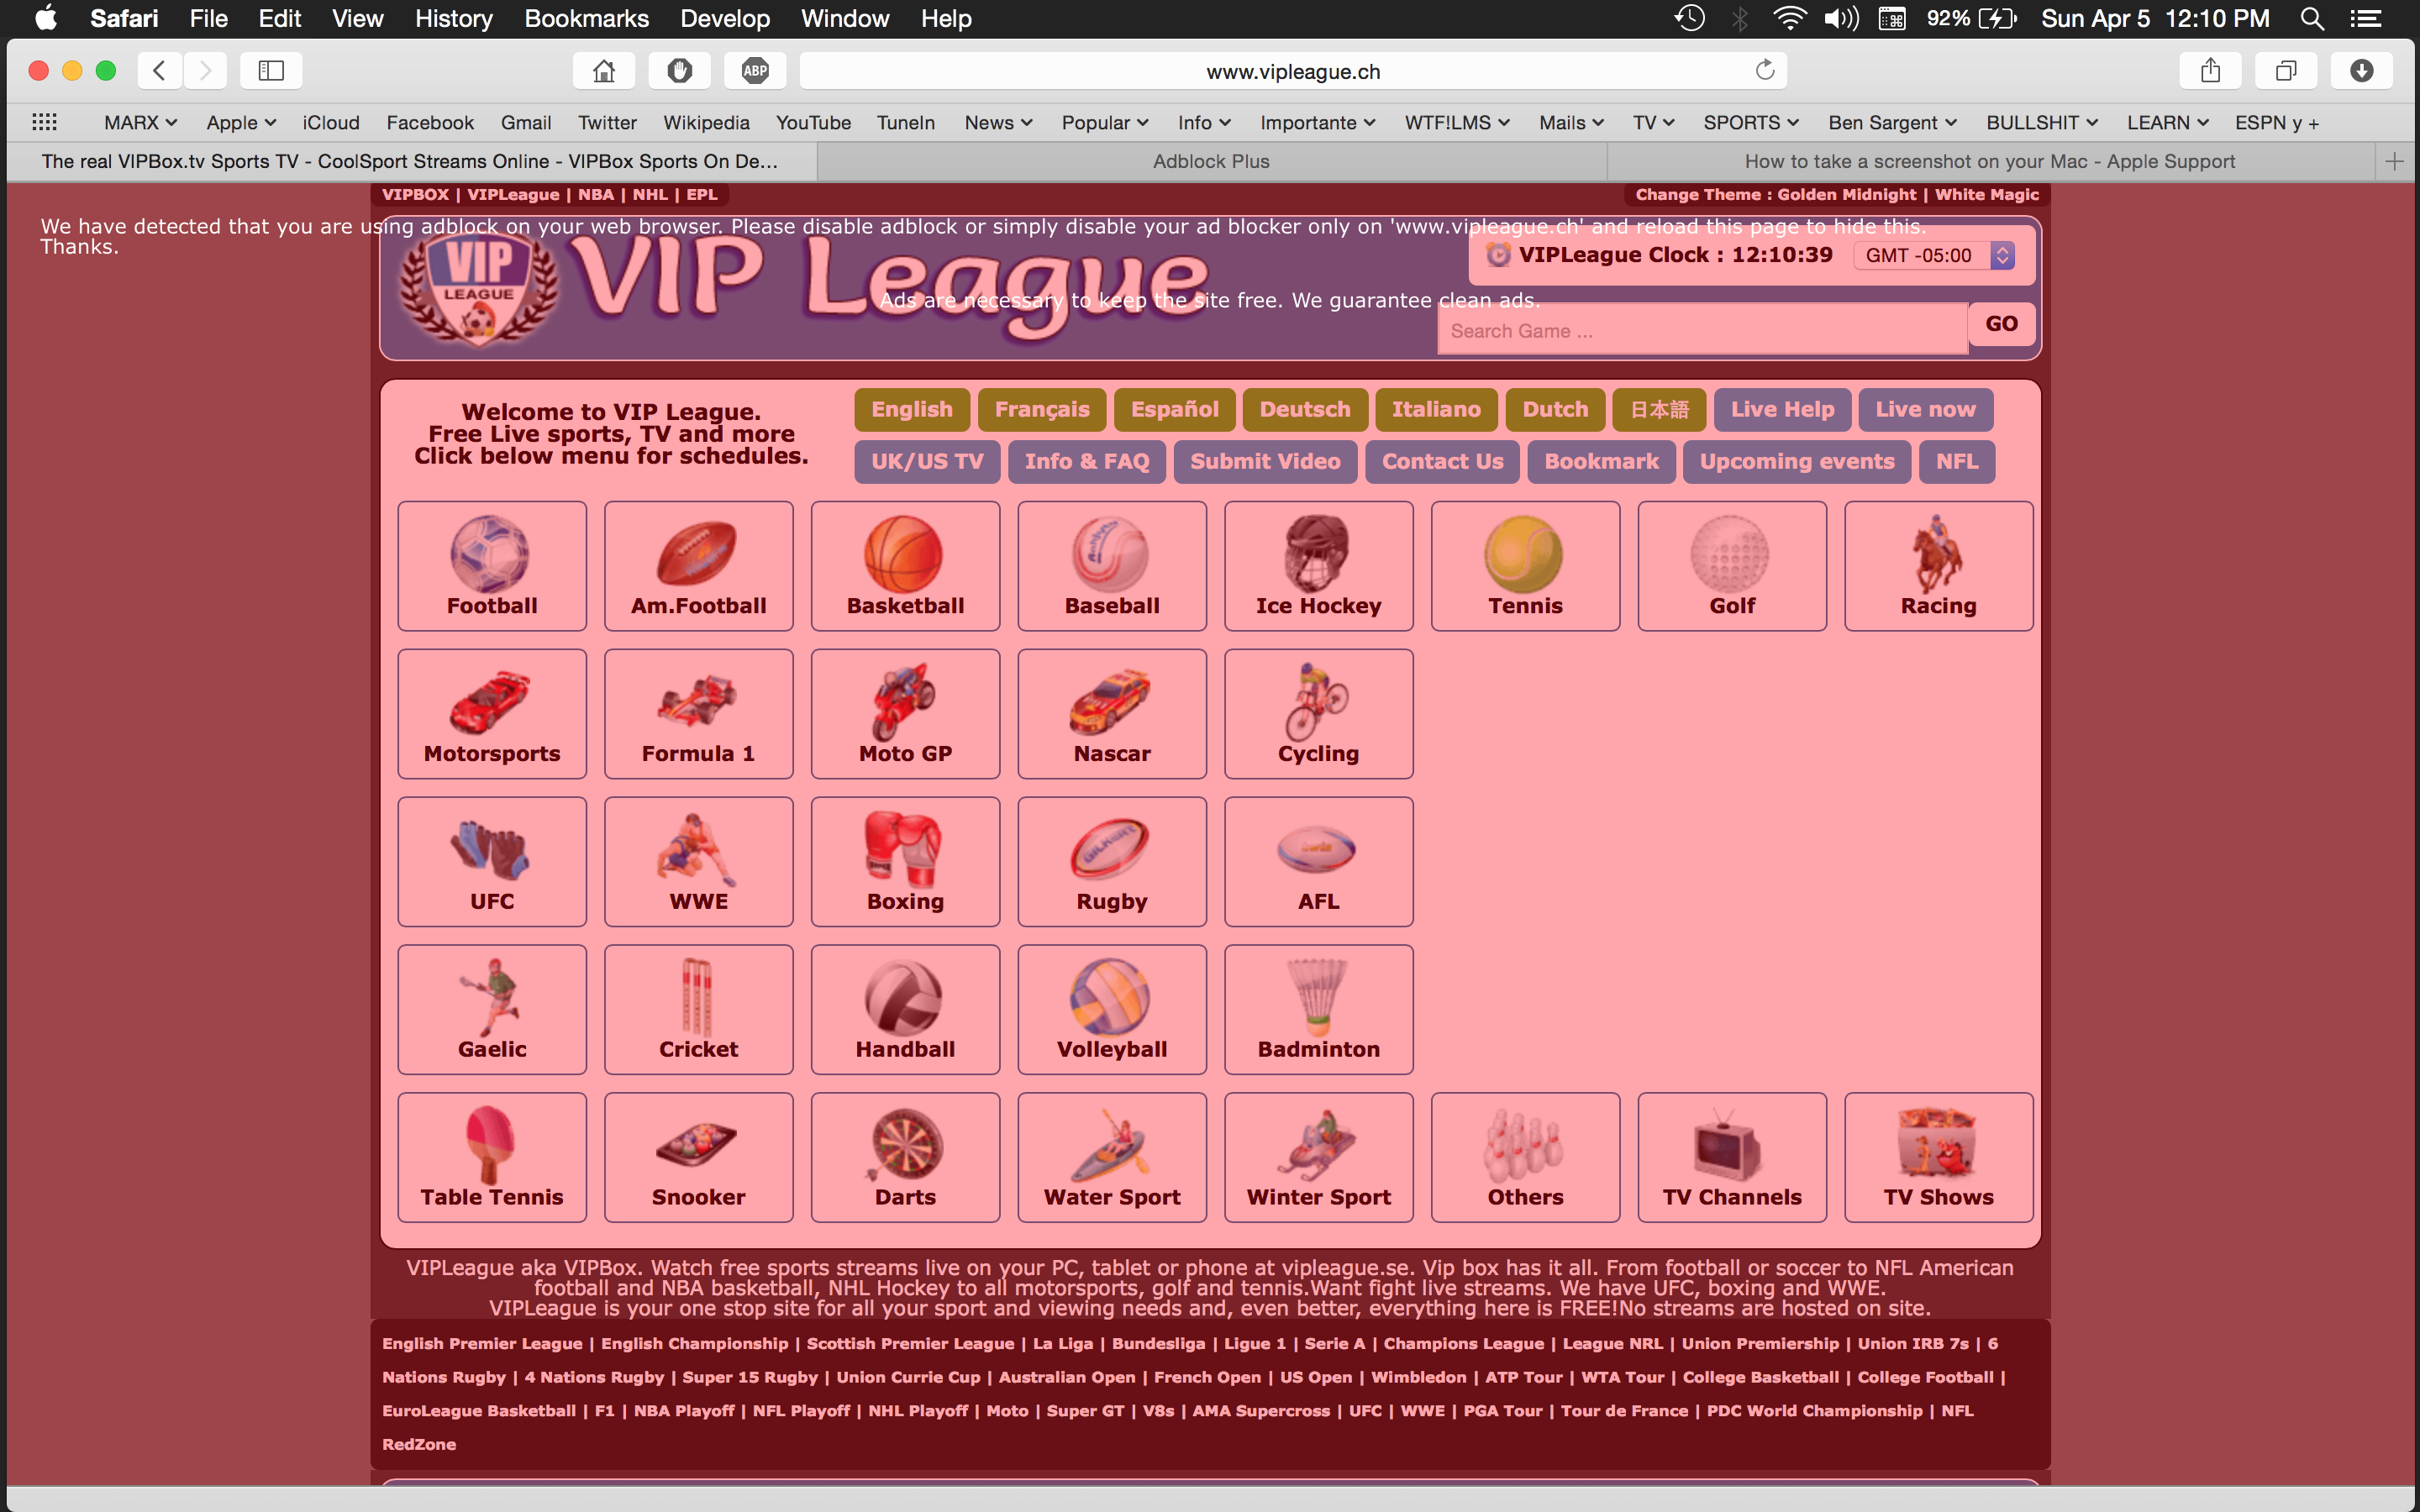 Impossible to block the ADBLOCK DETECTION SCREEN in www.vipleague.ch / Questions / Discussion Area